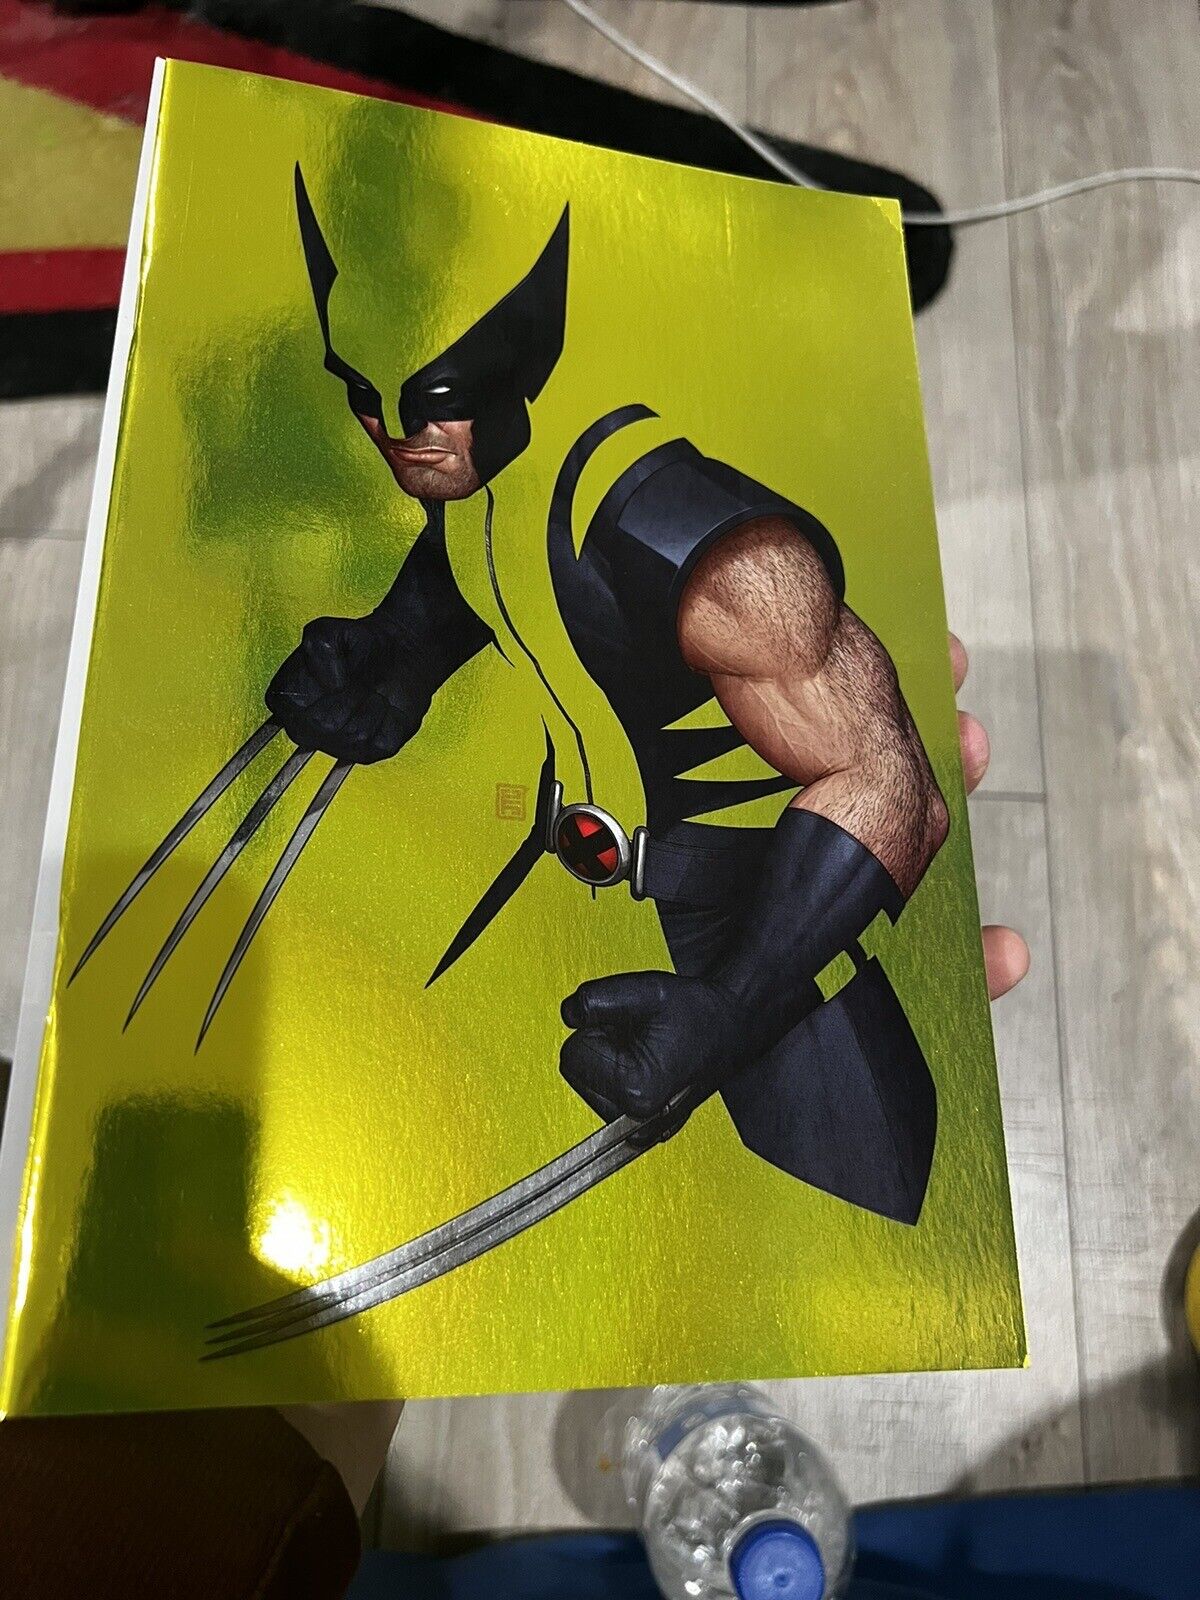 WOLVERINE #1 MEXICAN FOIL NEGATIVE SPACE VARIANT IN HAND